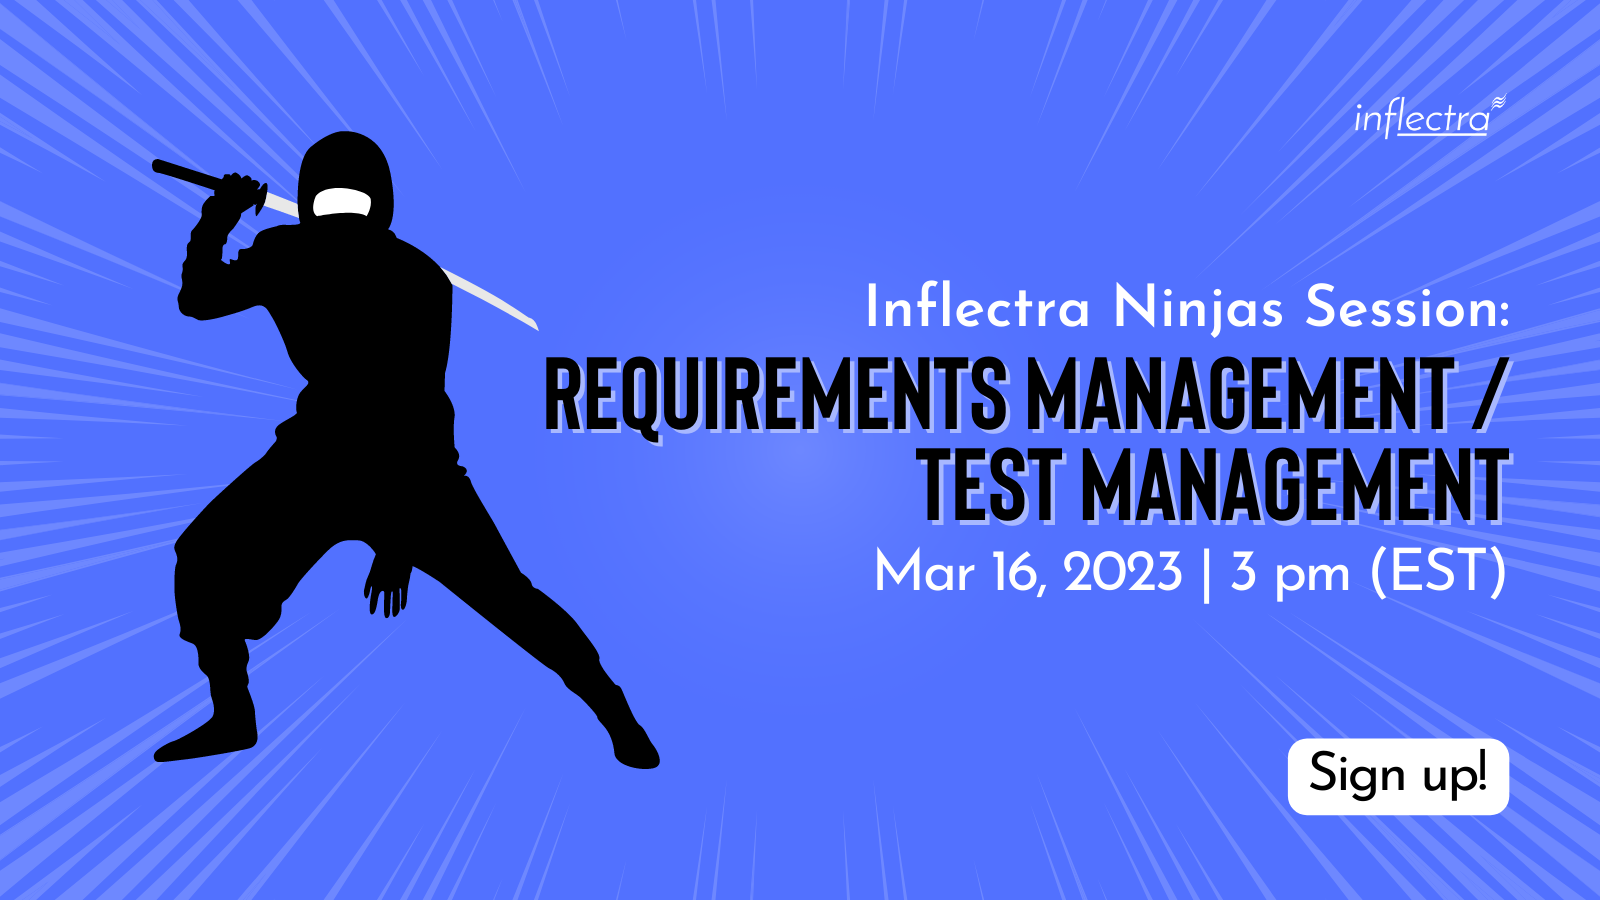 inflectra-ninjas-session-requirements-test-management-blue-background-black-text-image